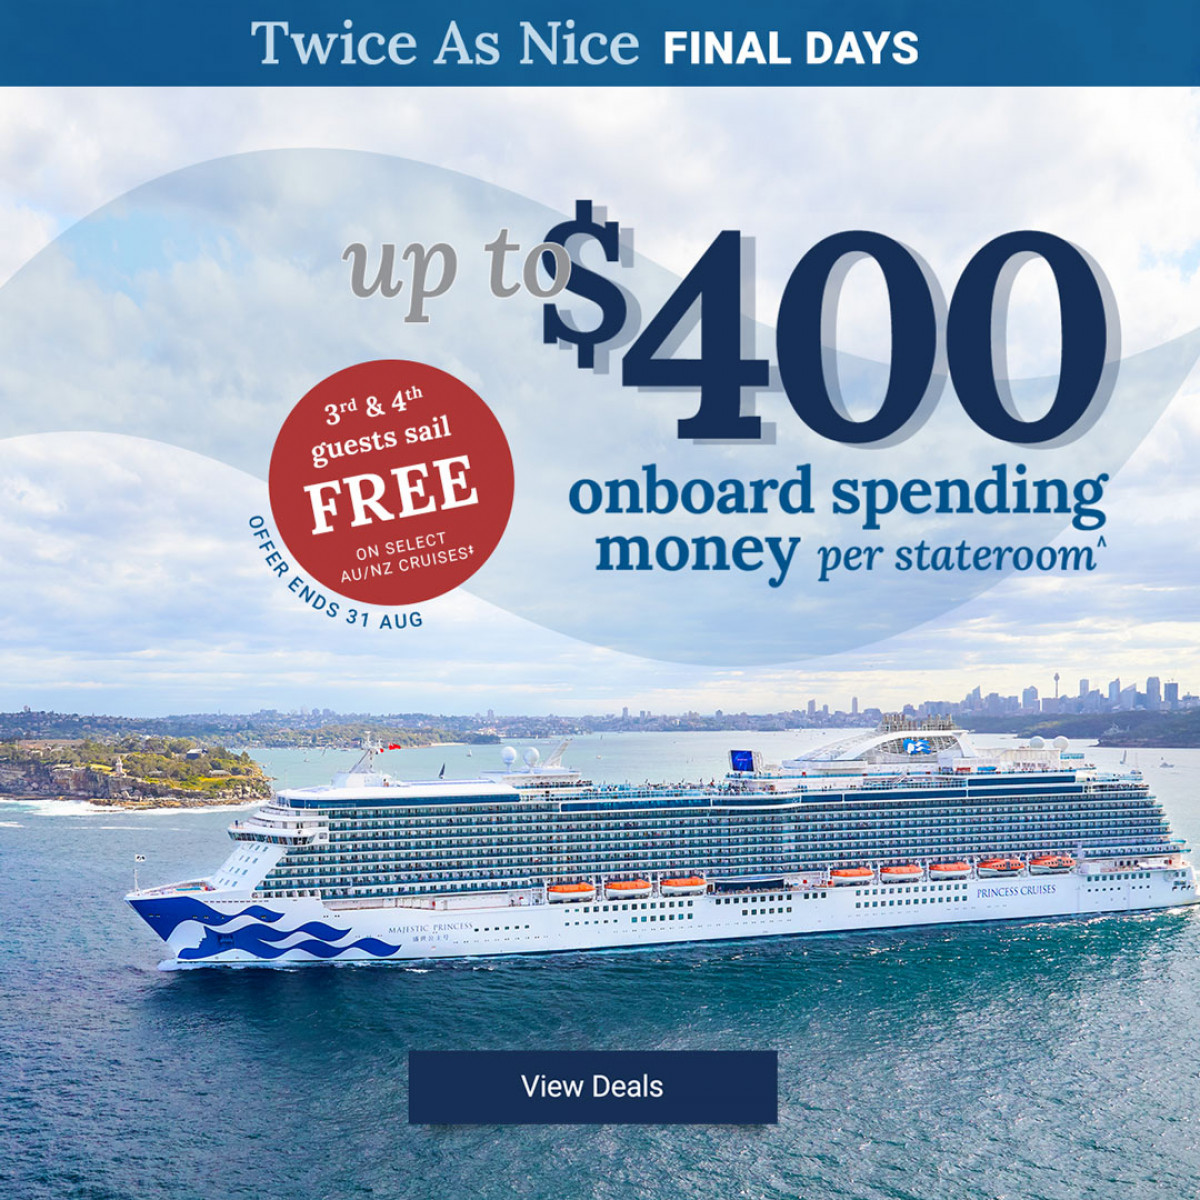 Princess Cruises Twice as Nice Cruise Offers with Free Spending Money